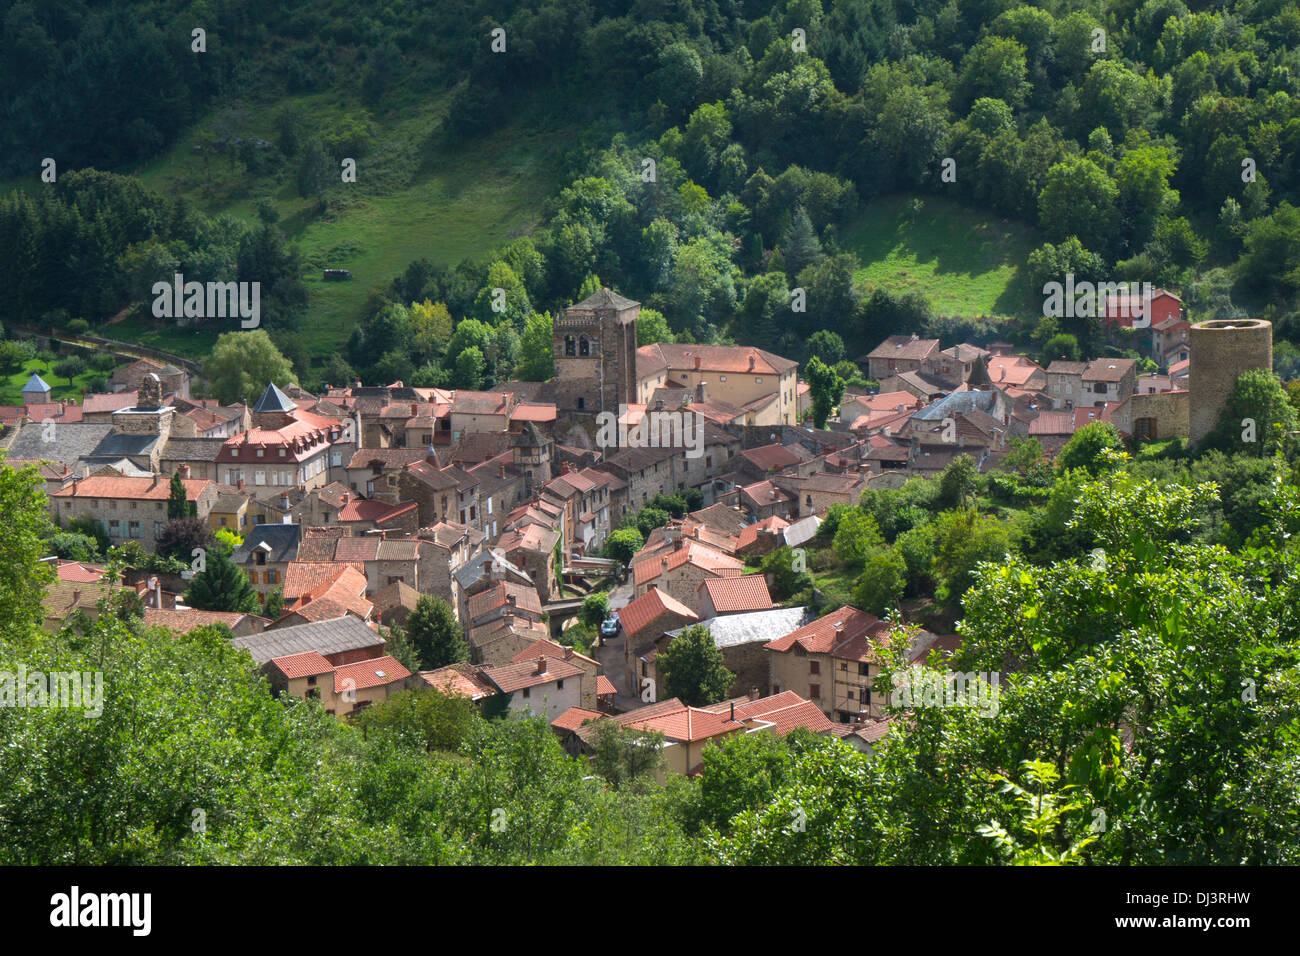 Pretty Medieval village of Blesle in Haute-loire Cantal region of central France Stock Photo